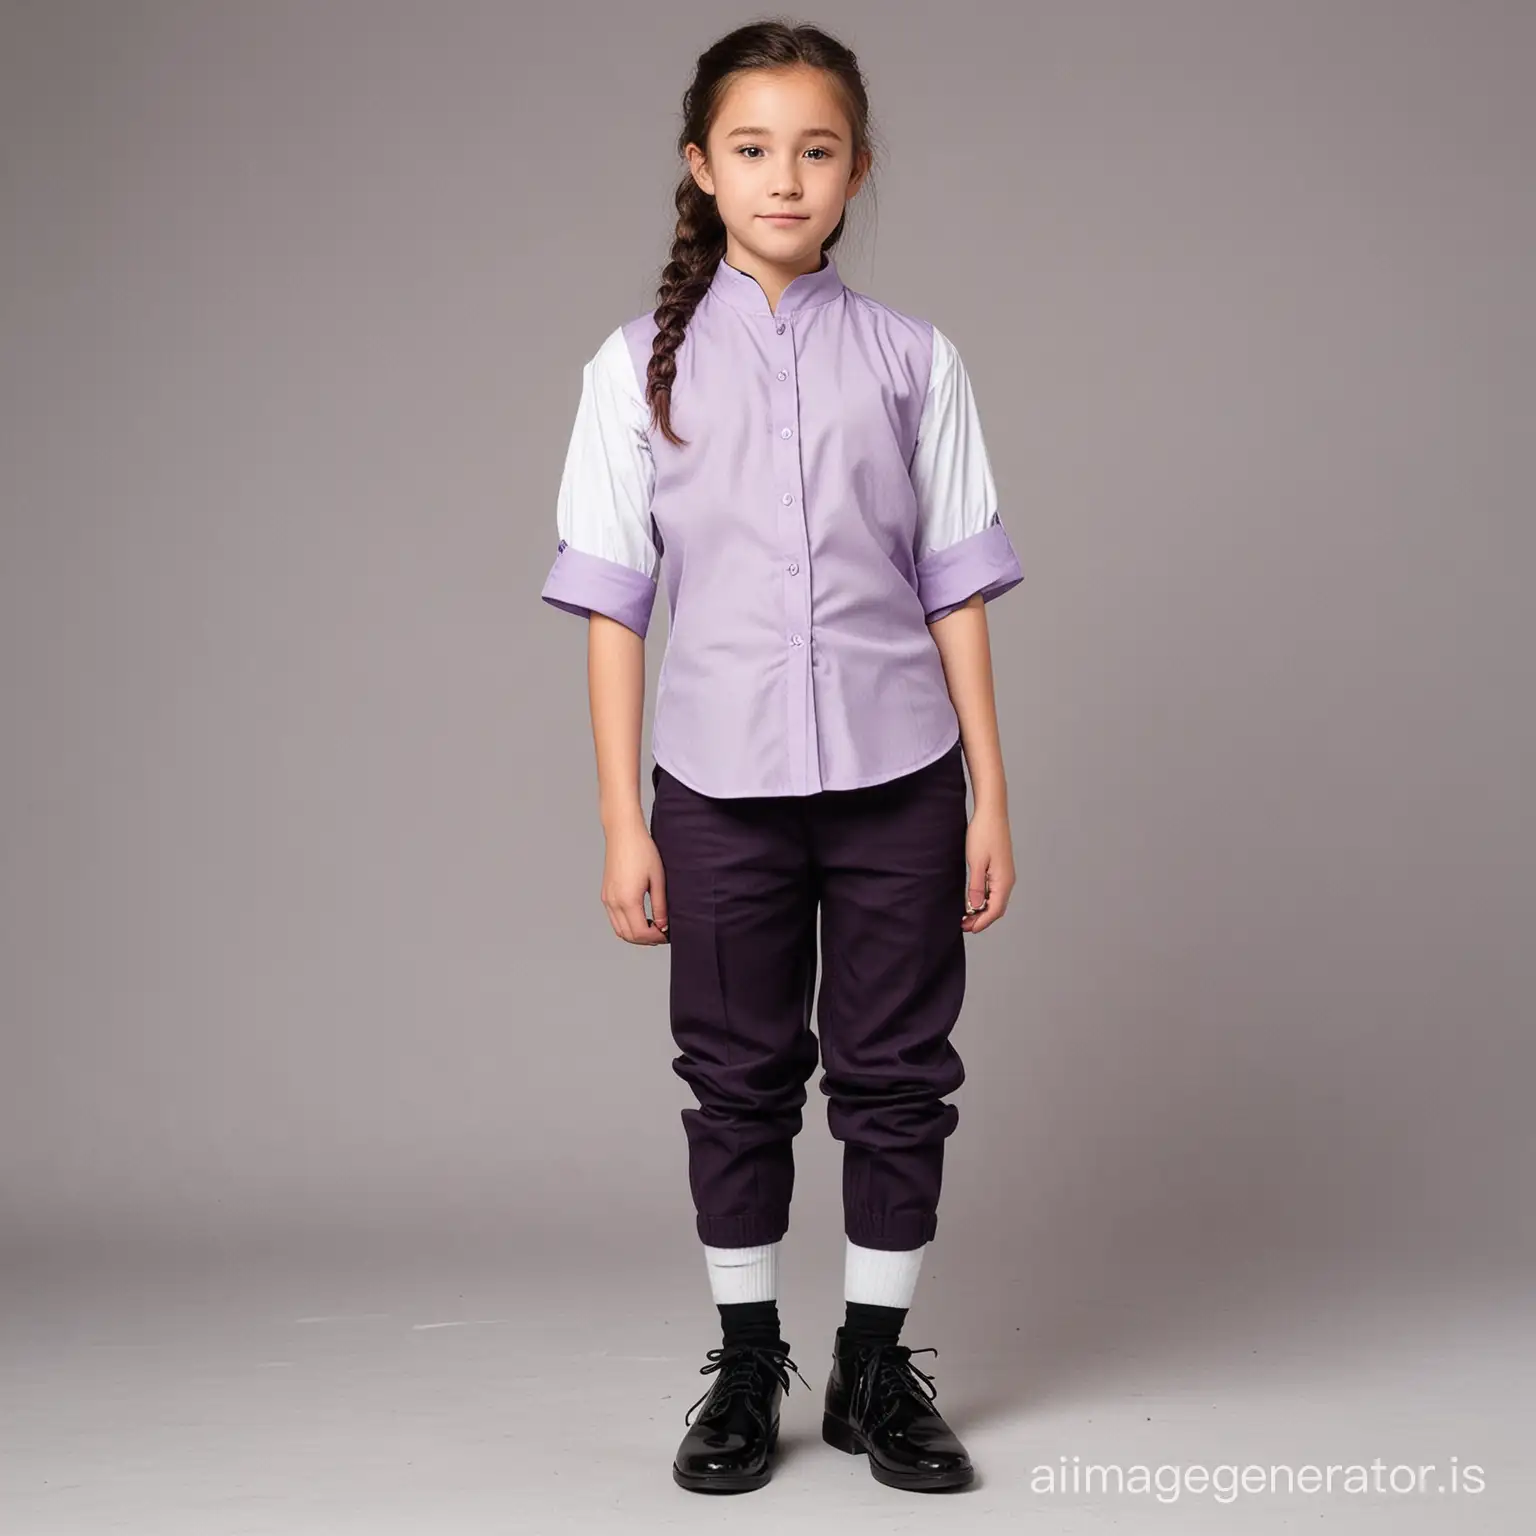 A 15 year old girl standing in a long shot. She is  facing camera, wearing light lavender half sleeve shirt with chinese collar.Her hair is single lined pony tailed. She wears a dark grape colored vest over the shirt. She wears a dark grape colored full length pants. She has black cut shoes on her foot and white socks